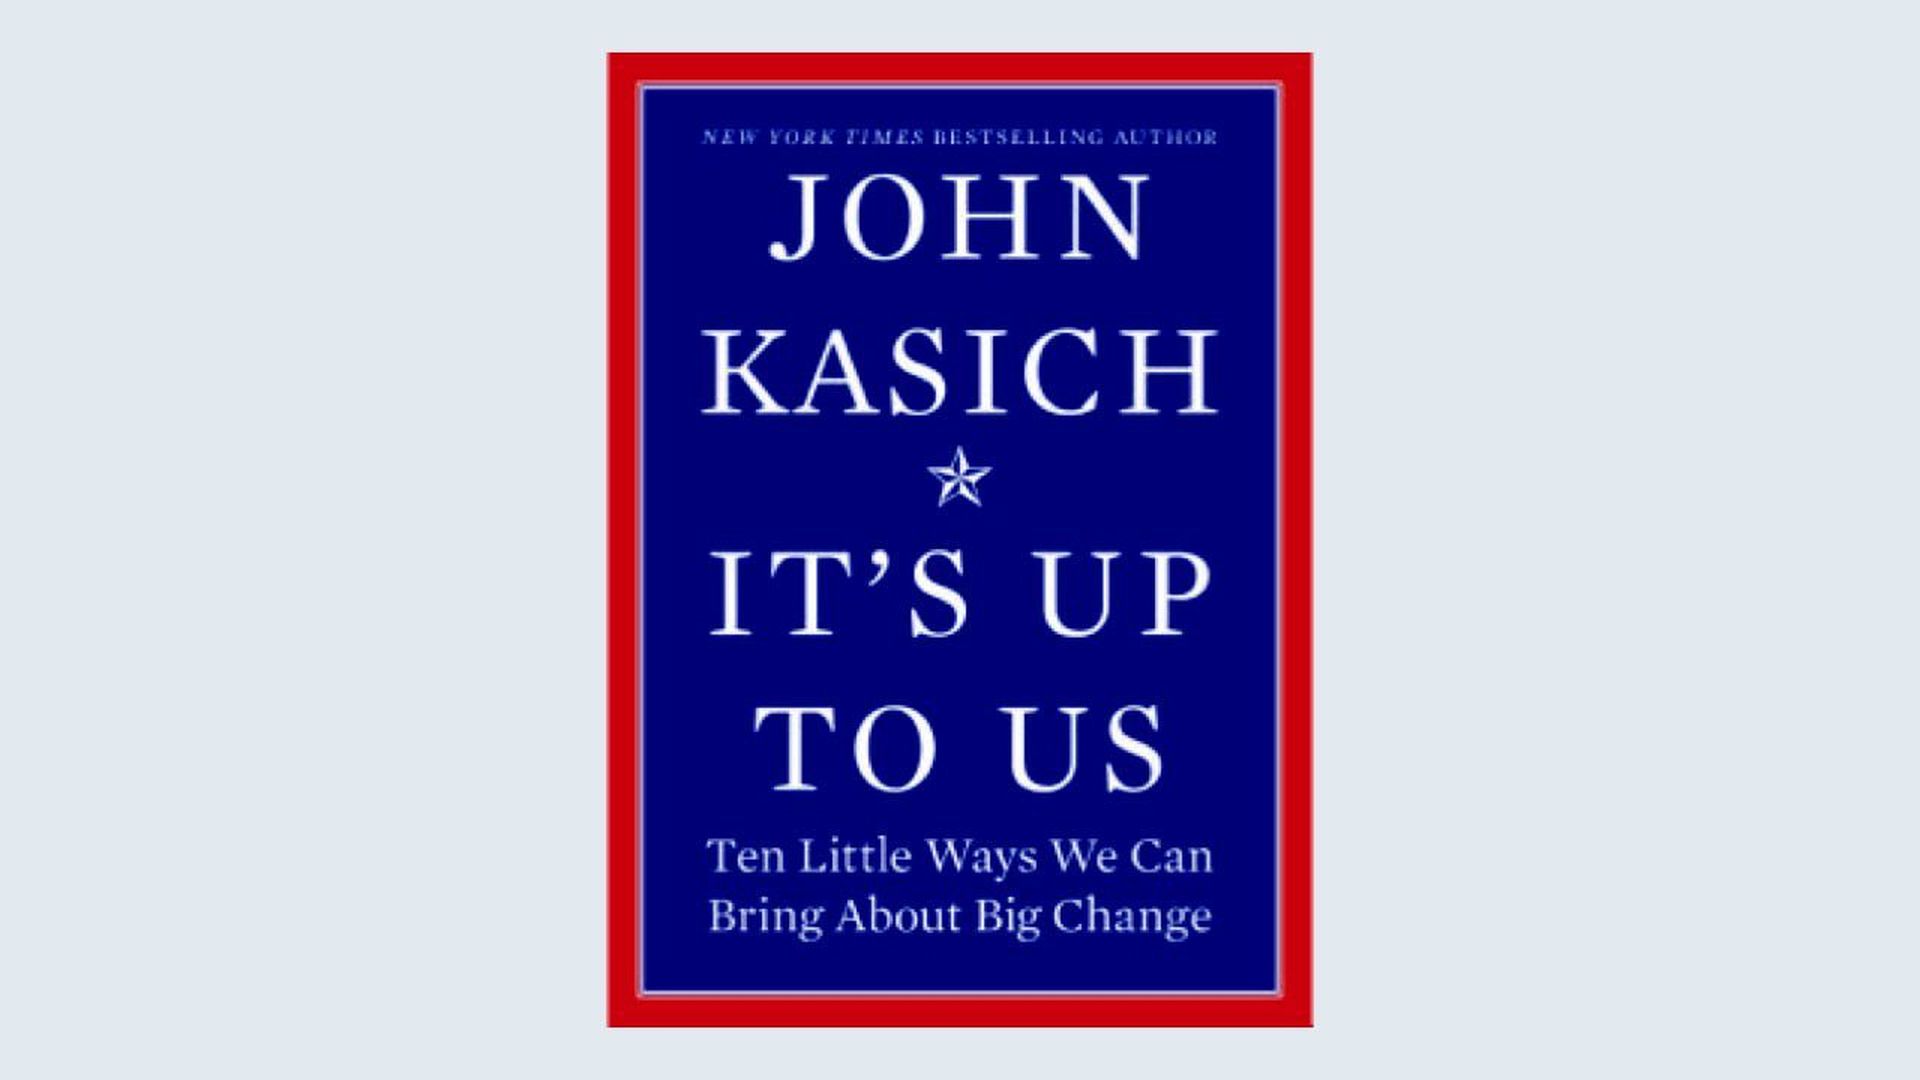 John Kasich's new book "it's up to us"